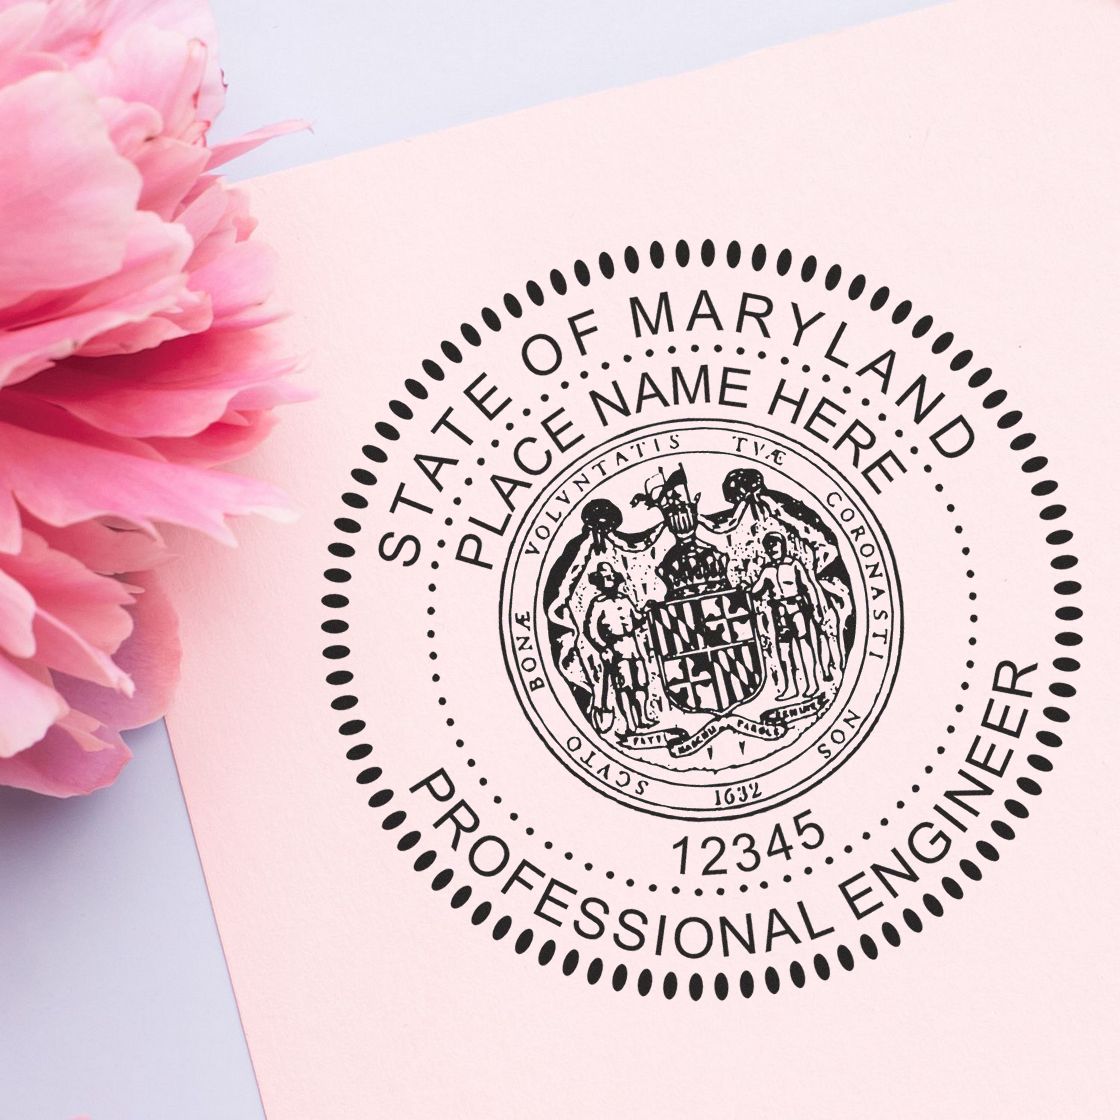 A stamped impression of the Premium MaxLight Pre-Inked Maryland Engineering Stamp in this stylish lifestyle photo, setting the tone for a unique and personalized product.